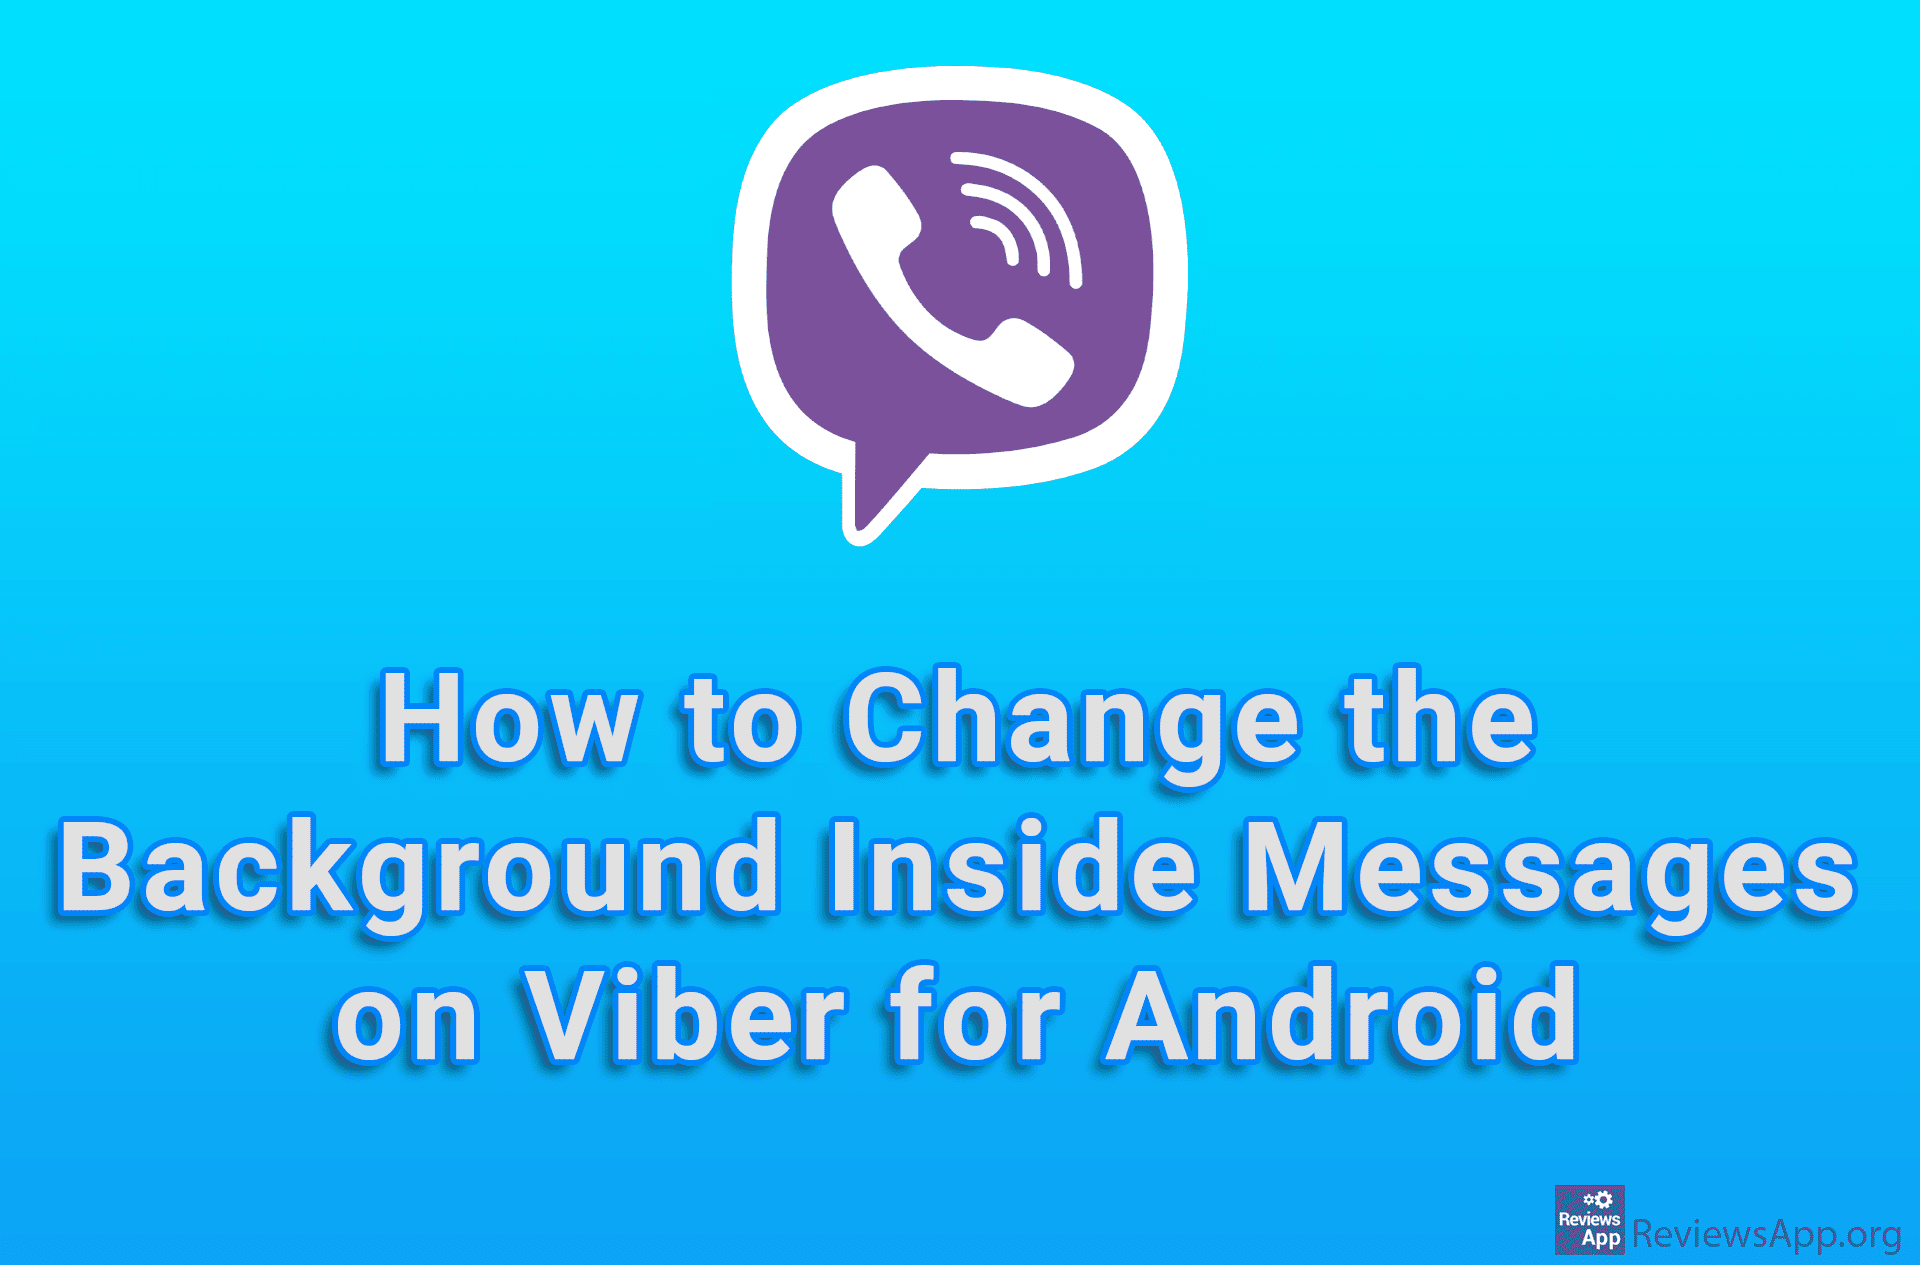 How to Change the Background Inside Messages on Viber for Android